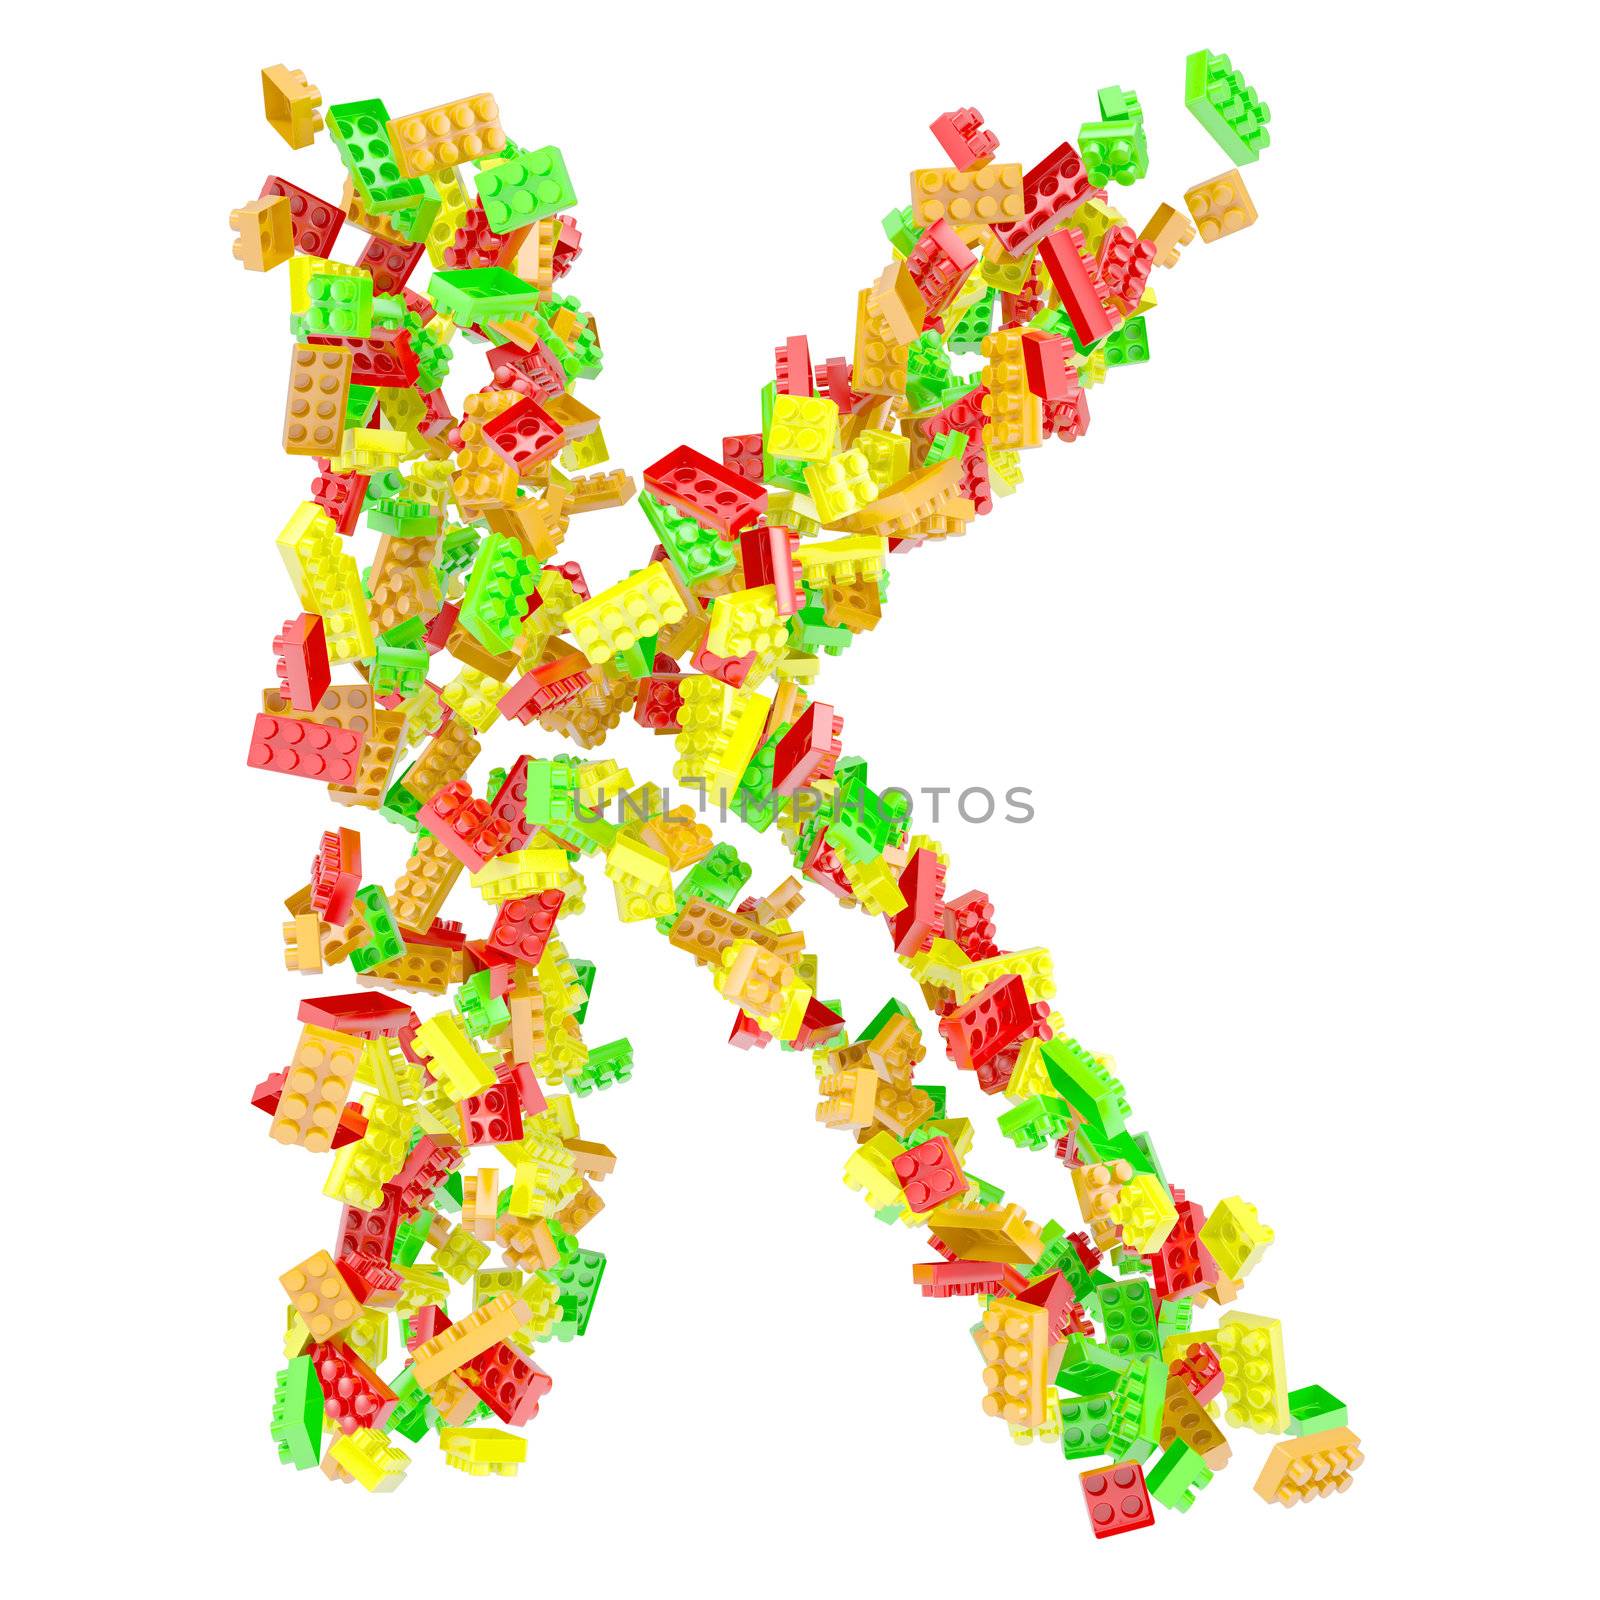 The letter K is made up of children's blocks. Isolated render on a white background